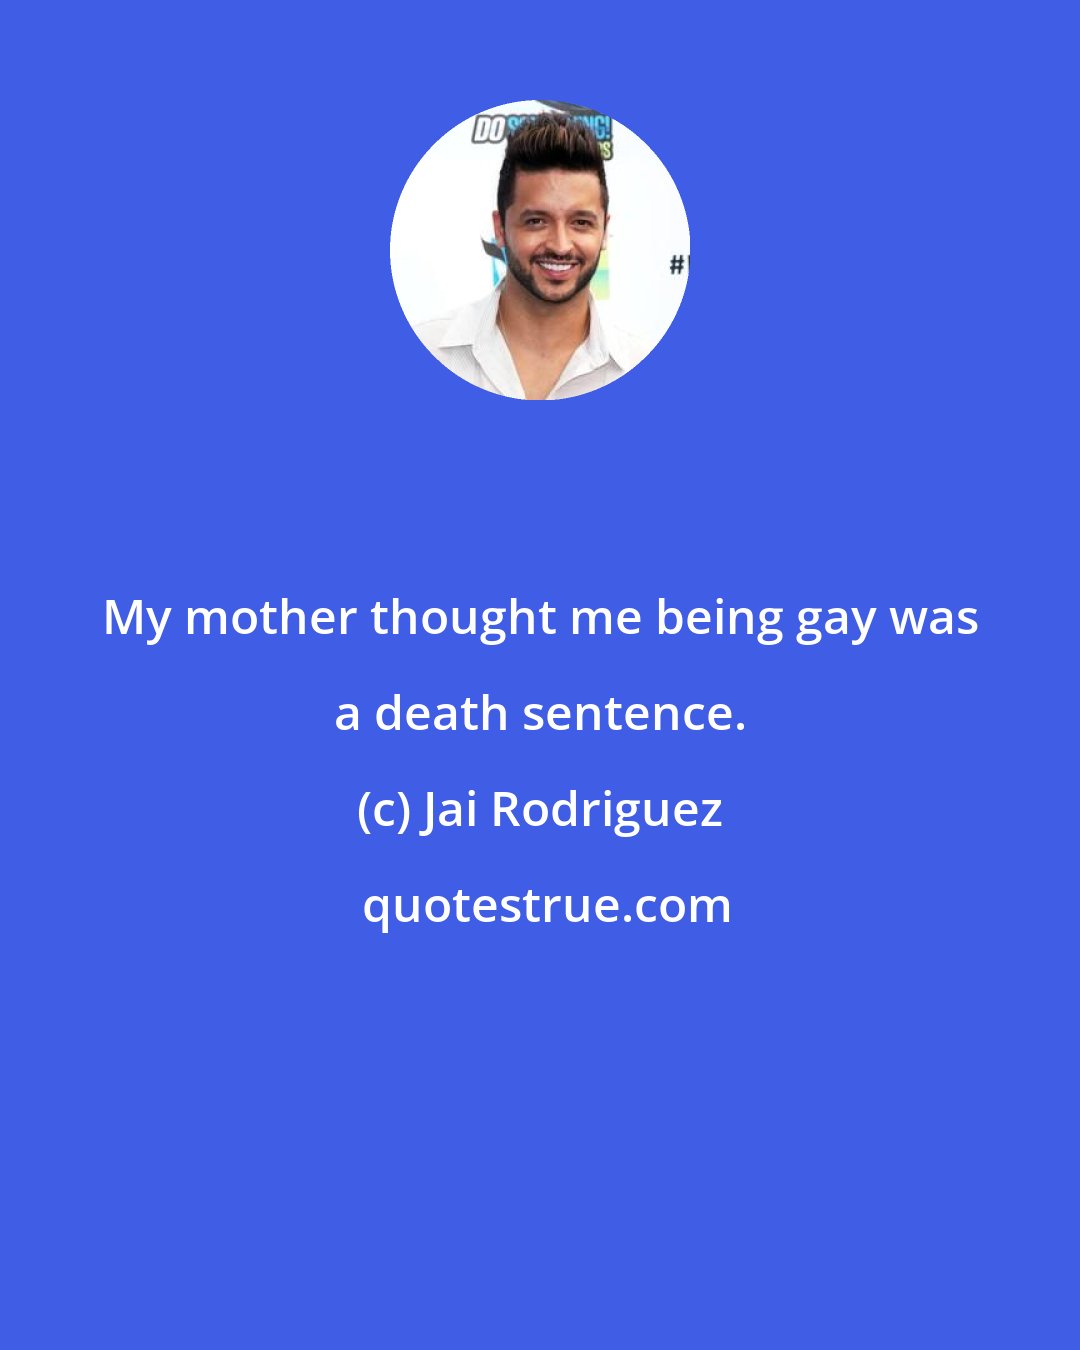 Jai Rodriguez: My mother thought me being gay was a death sentence.